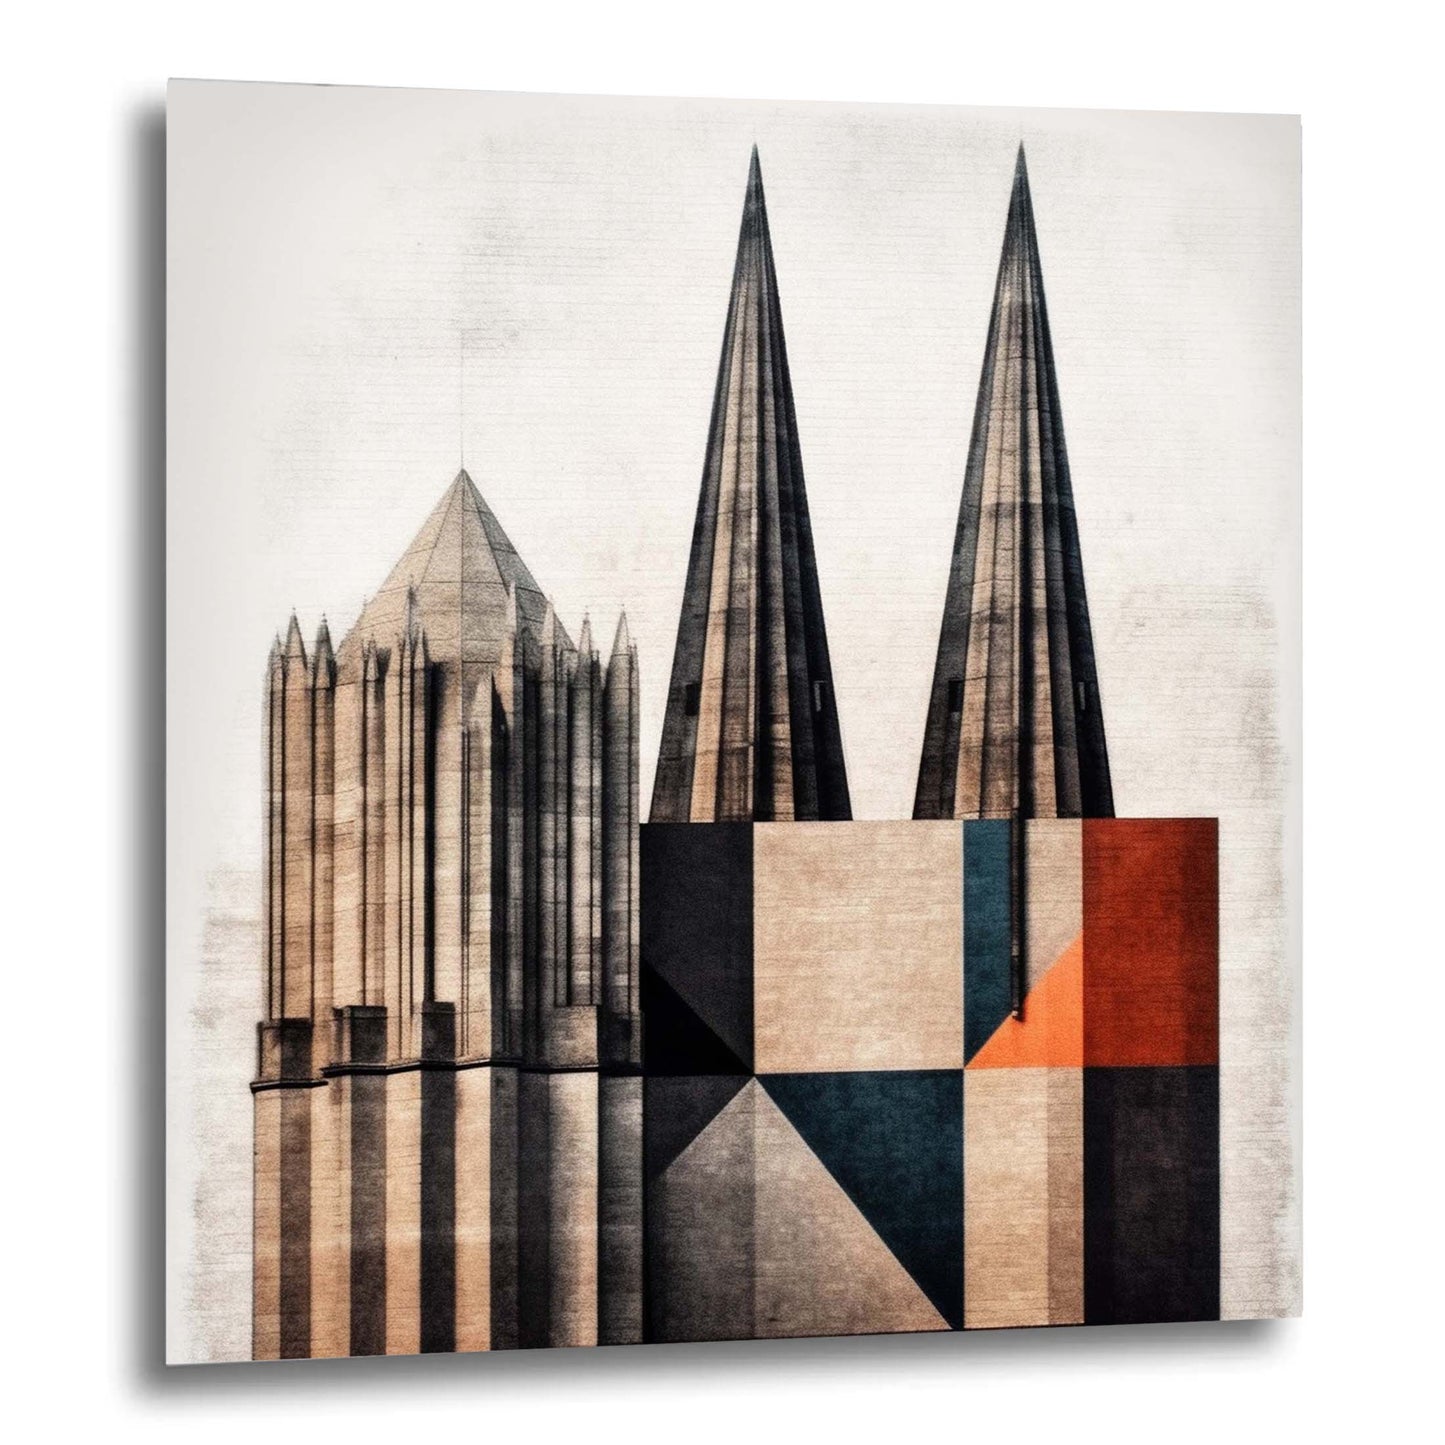 Cologne Cathedral - mural in the style of minimalism